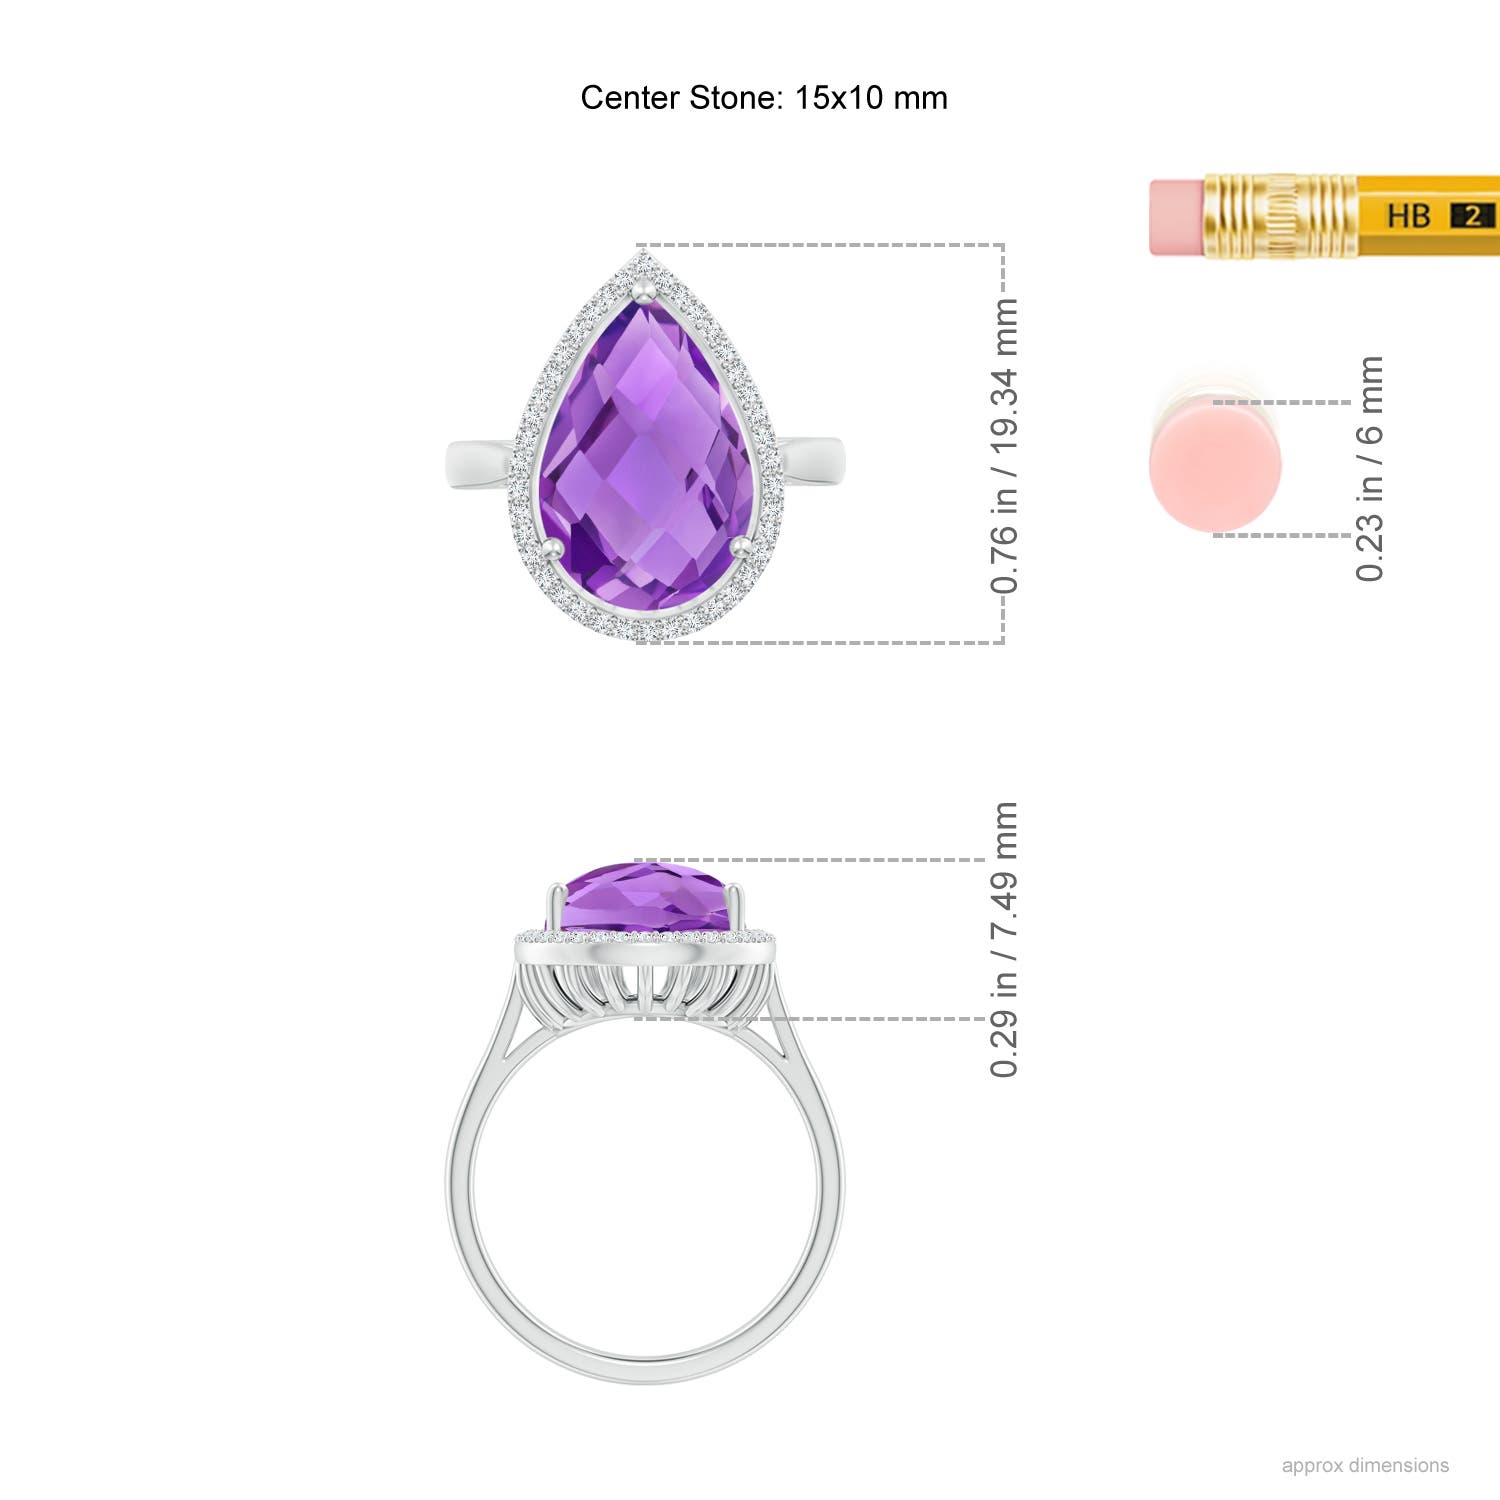 AA - Amethyst / 5.1 CT / 14 KT White Gold